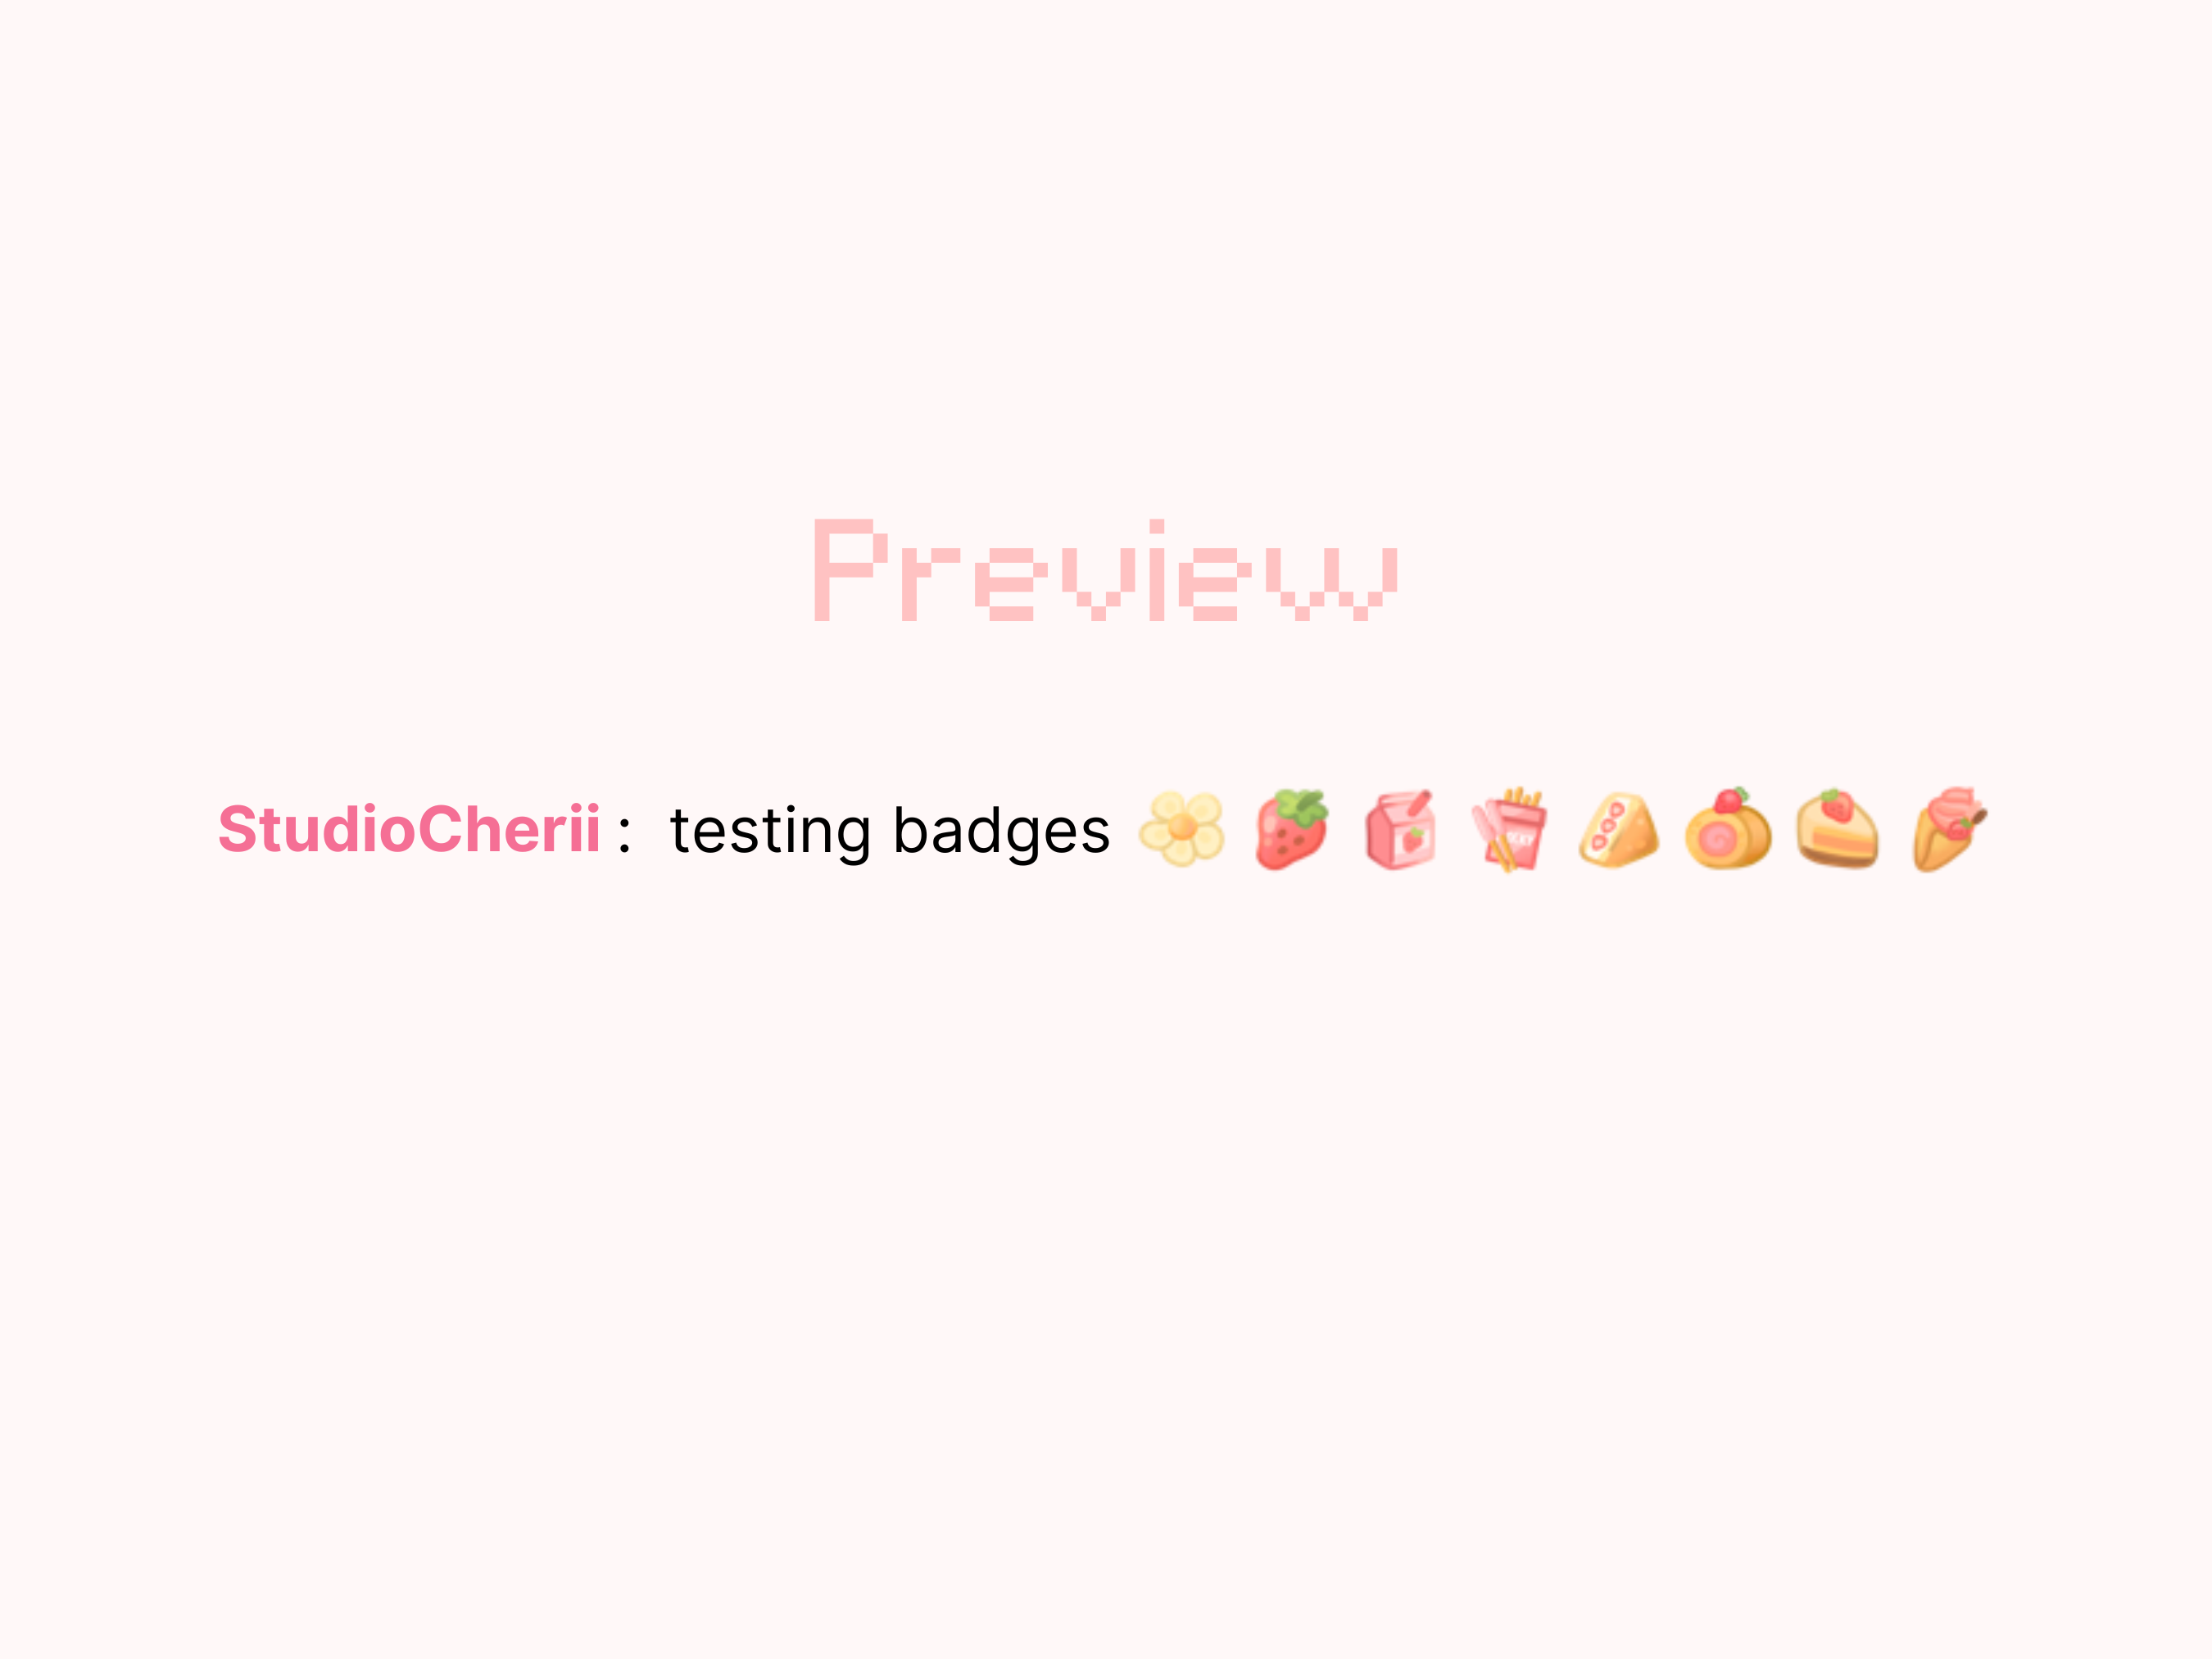 Strawberry Twitch Badges Twitch Sub Badges (Instant Download) 